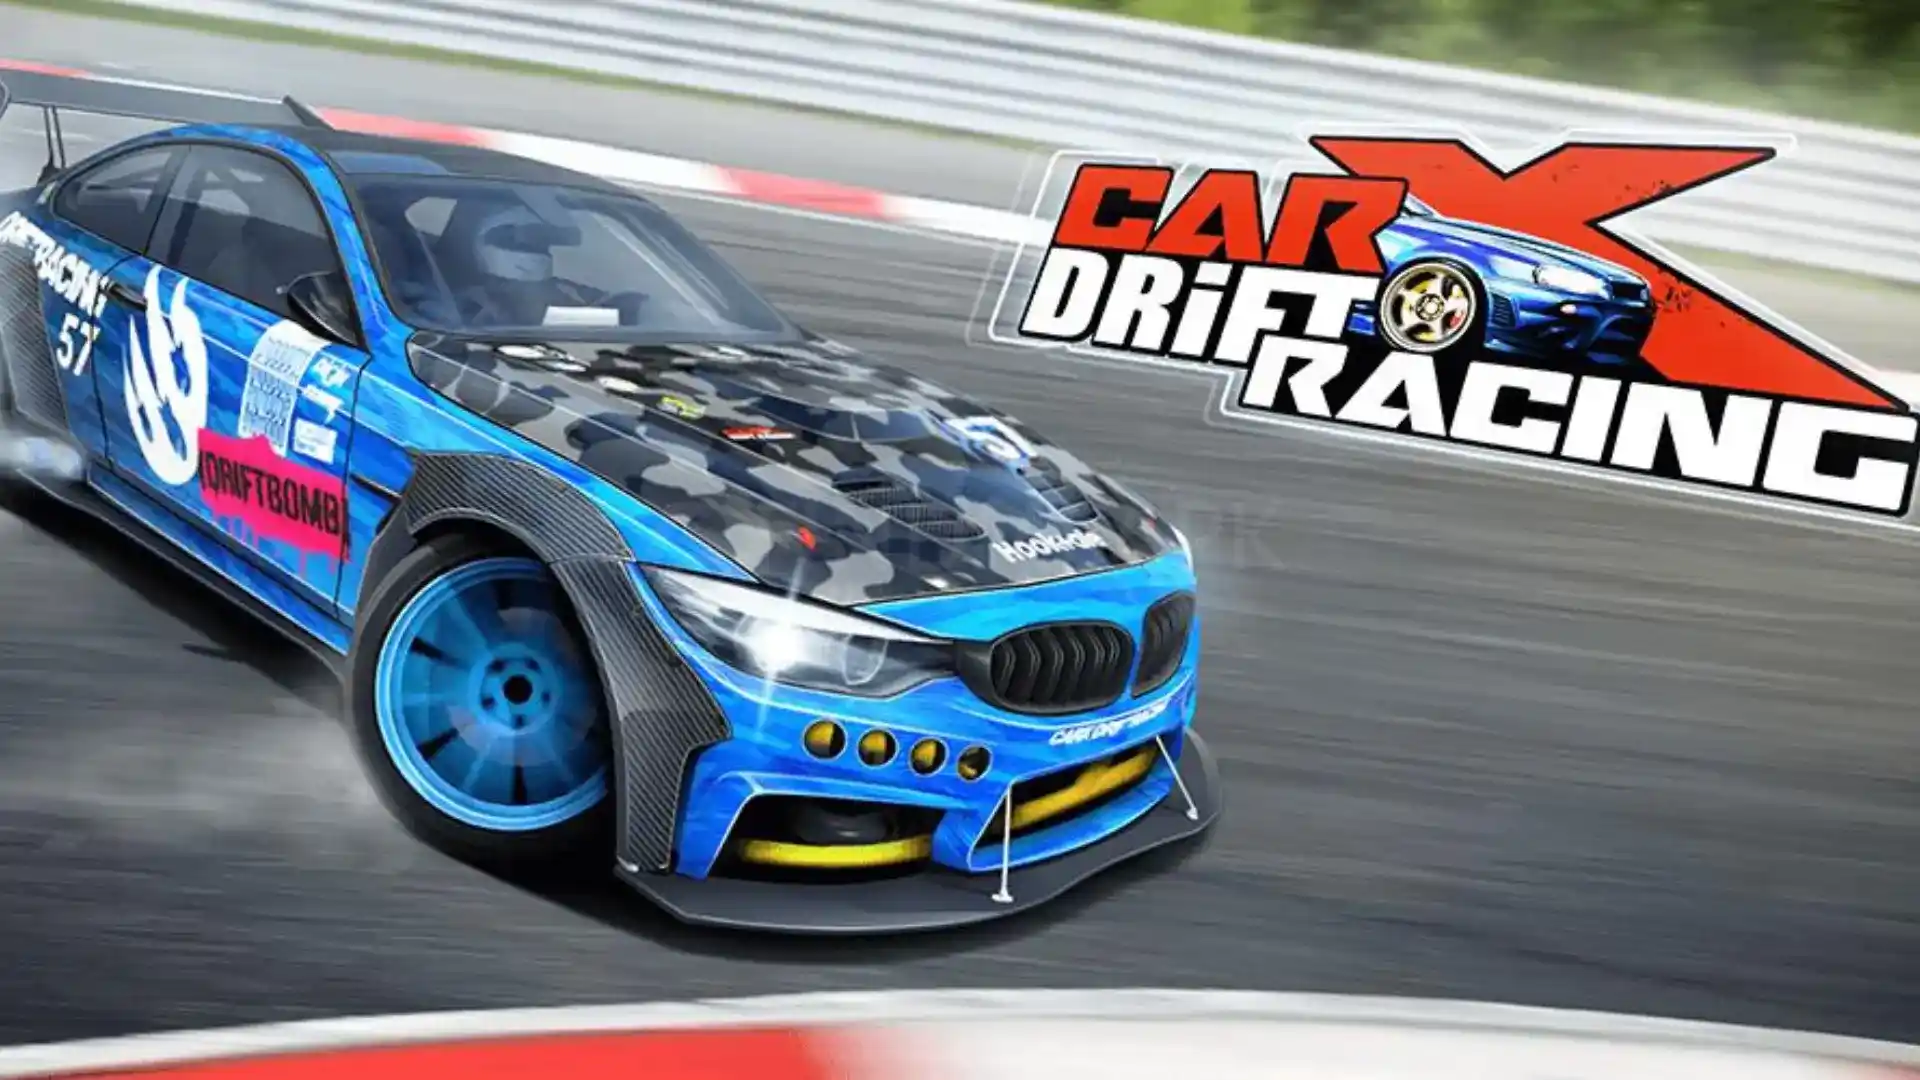 Carx drift racing feature image